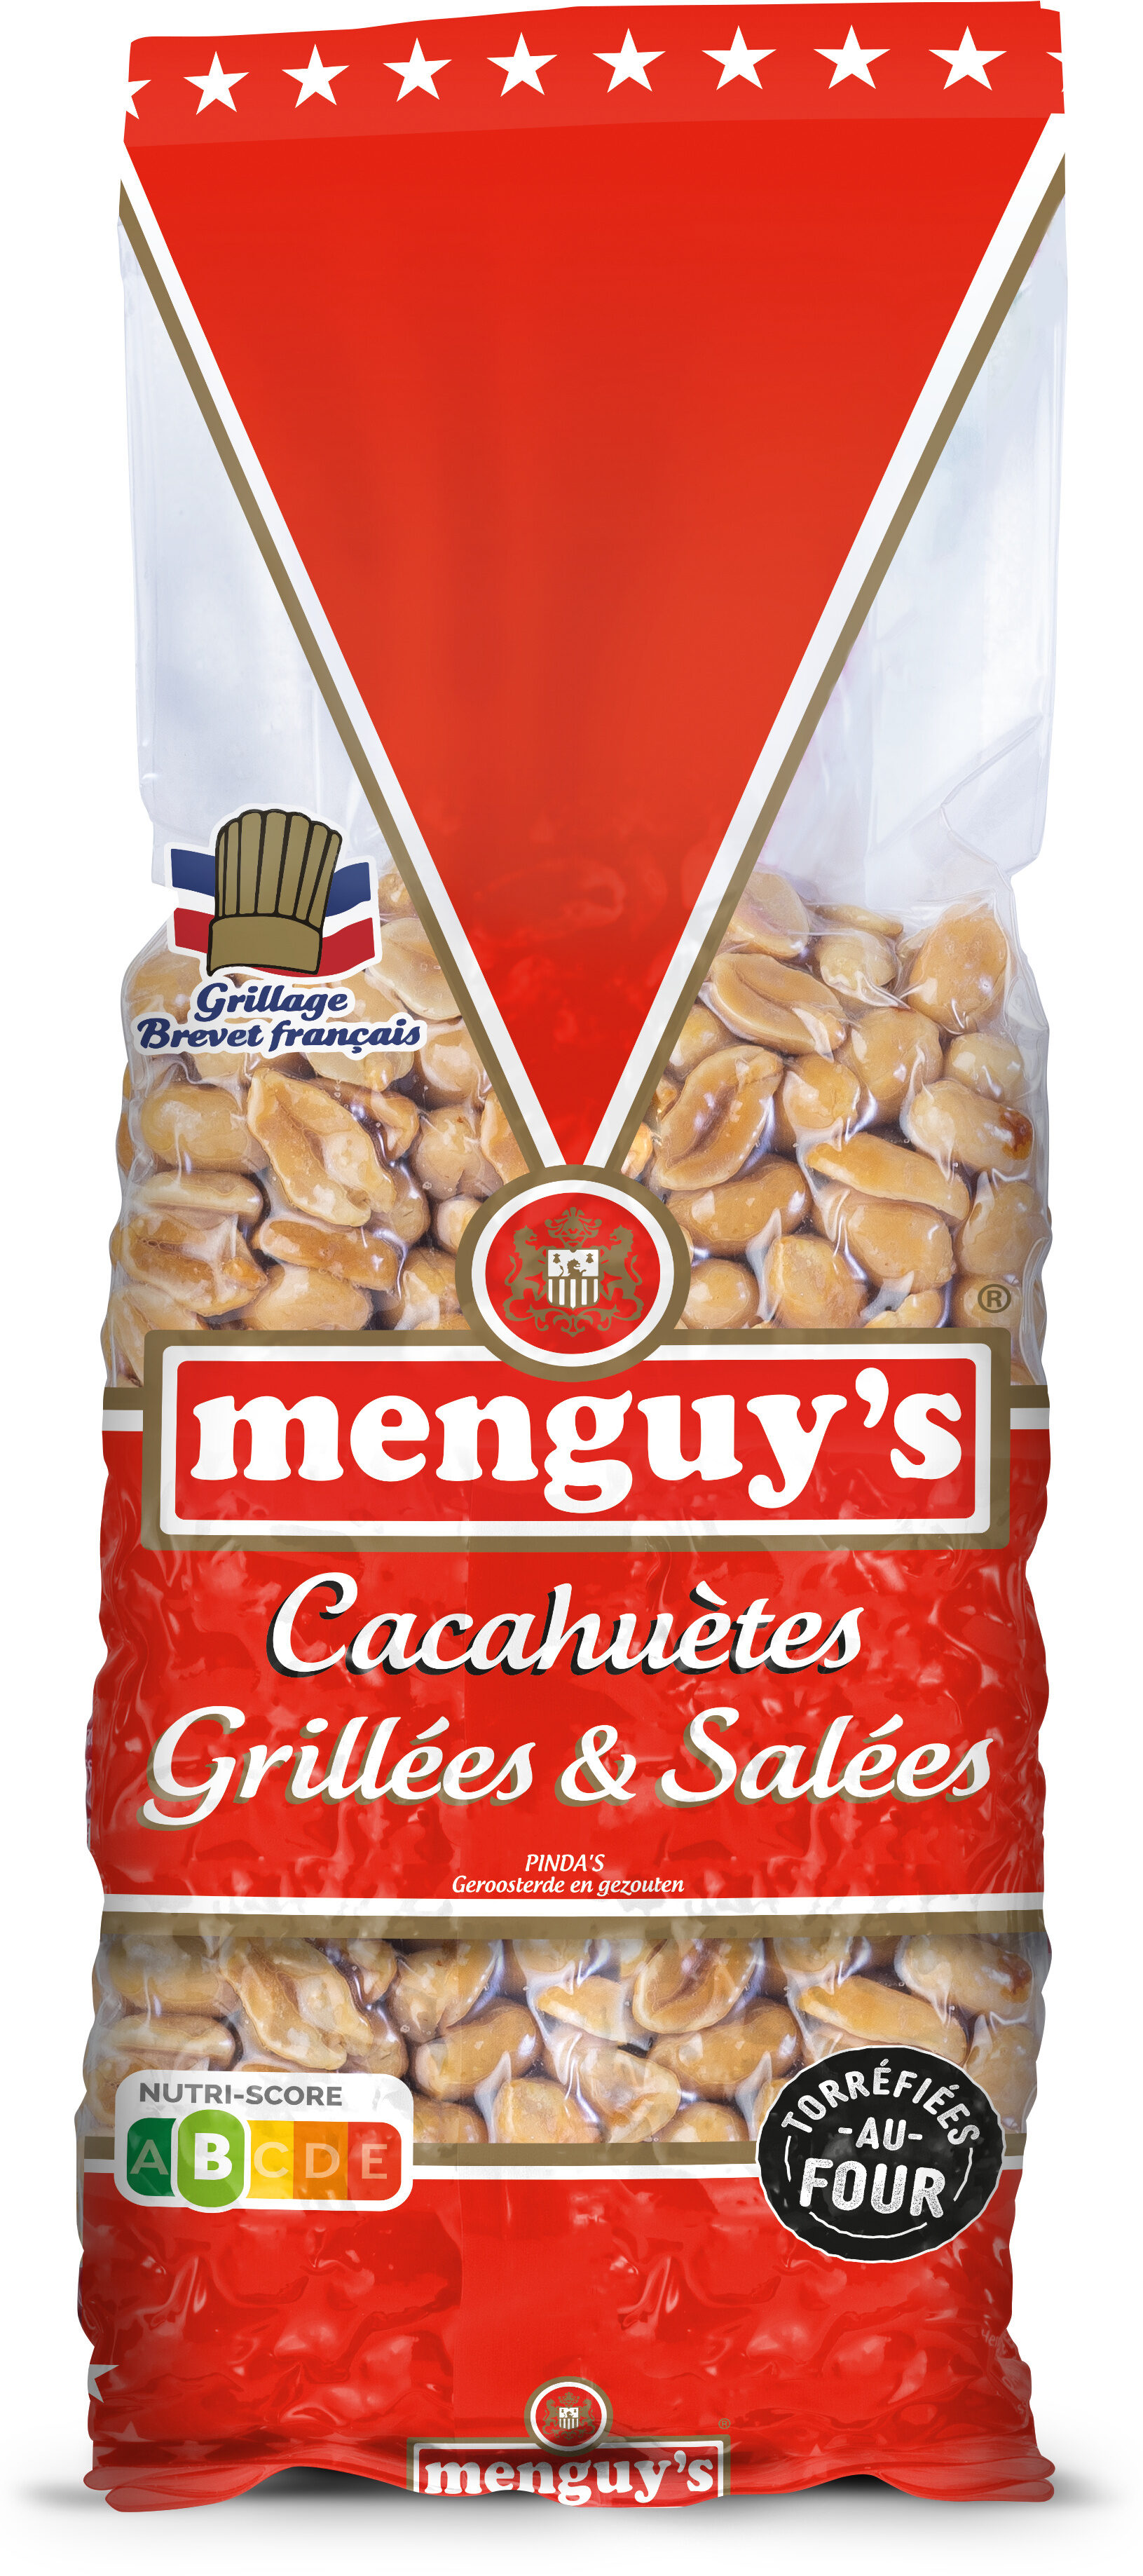 Menguy's cacahuetes grillees salees 700 g - Product - fr